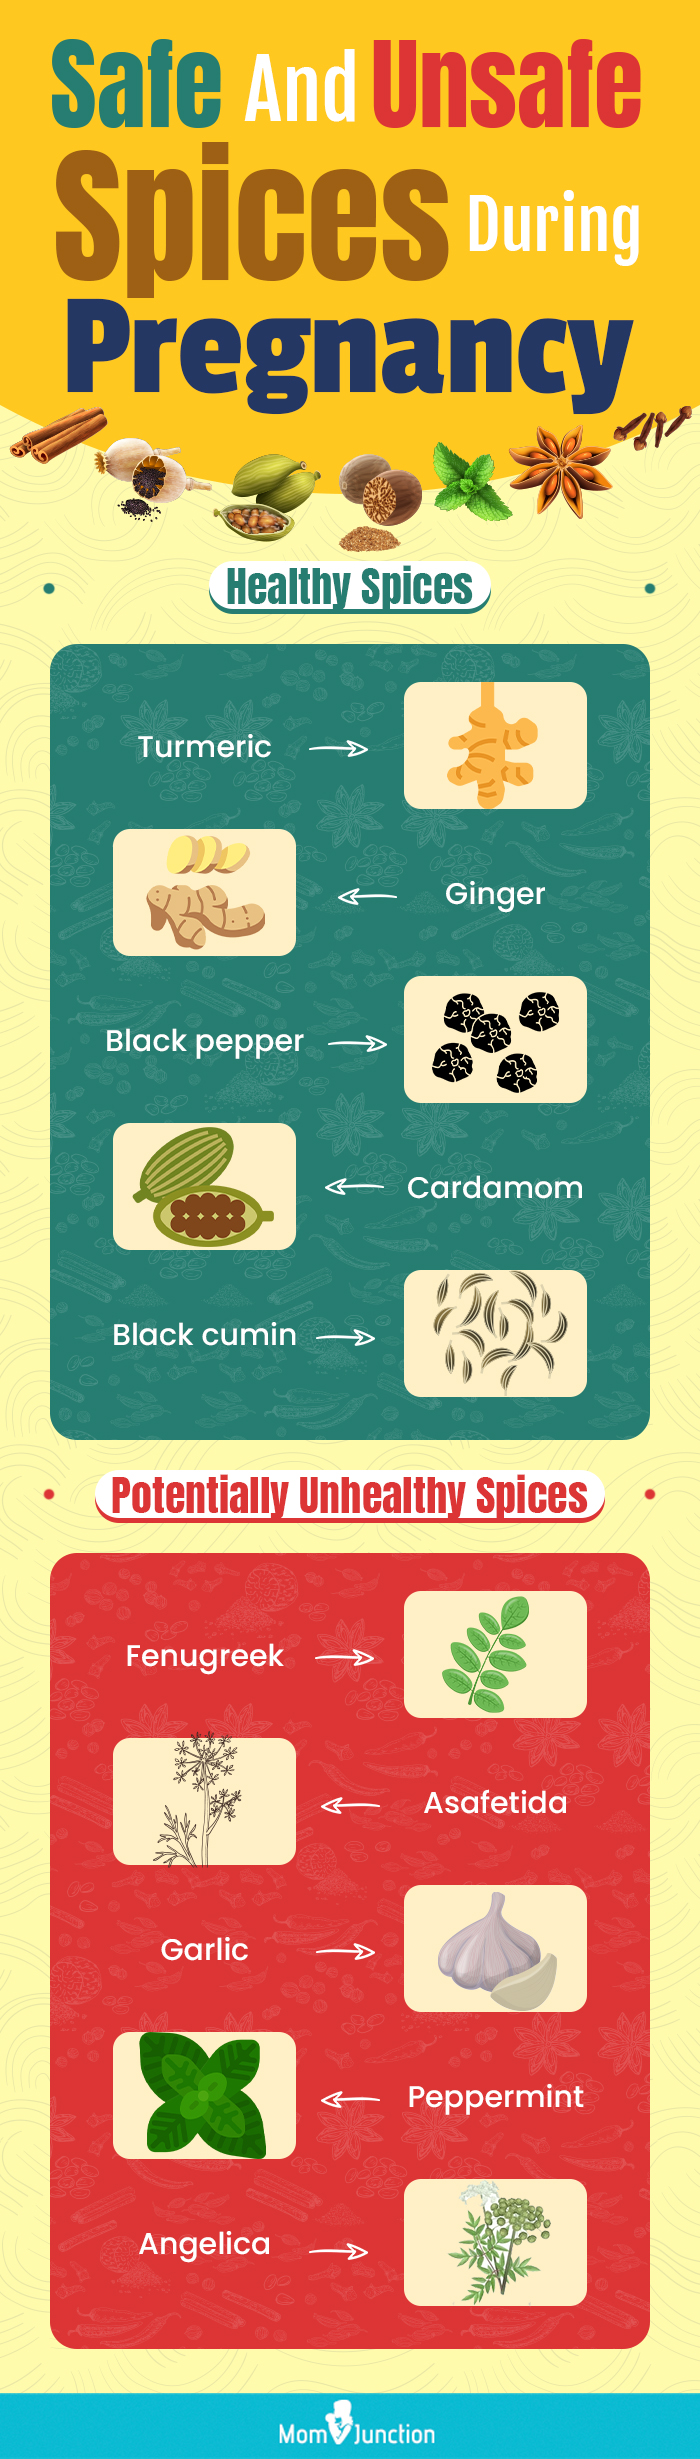 safe and unsafe spices during pregnancy (infographic)